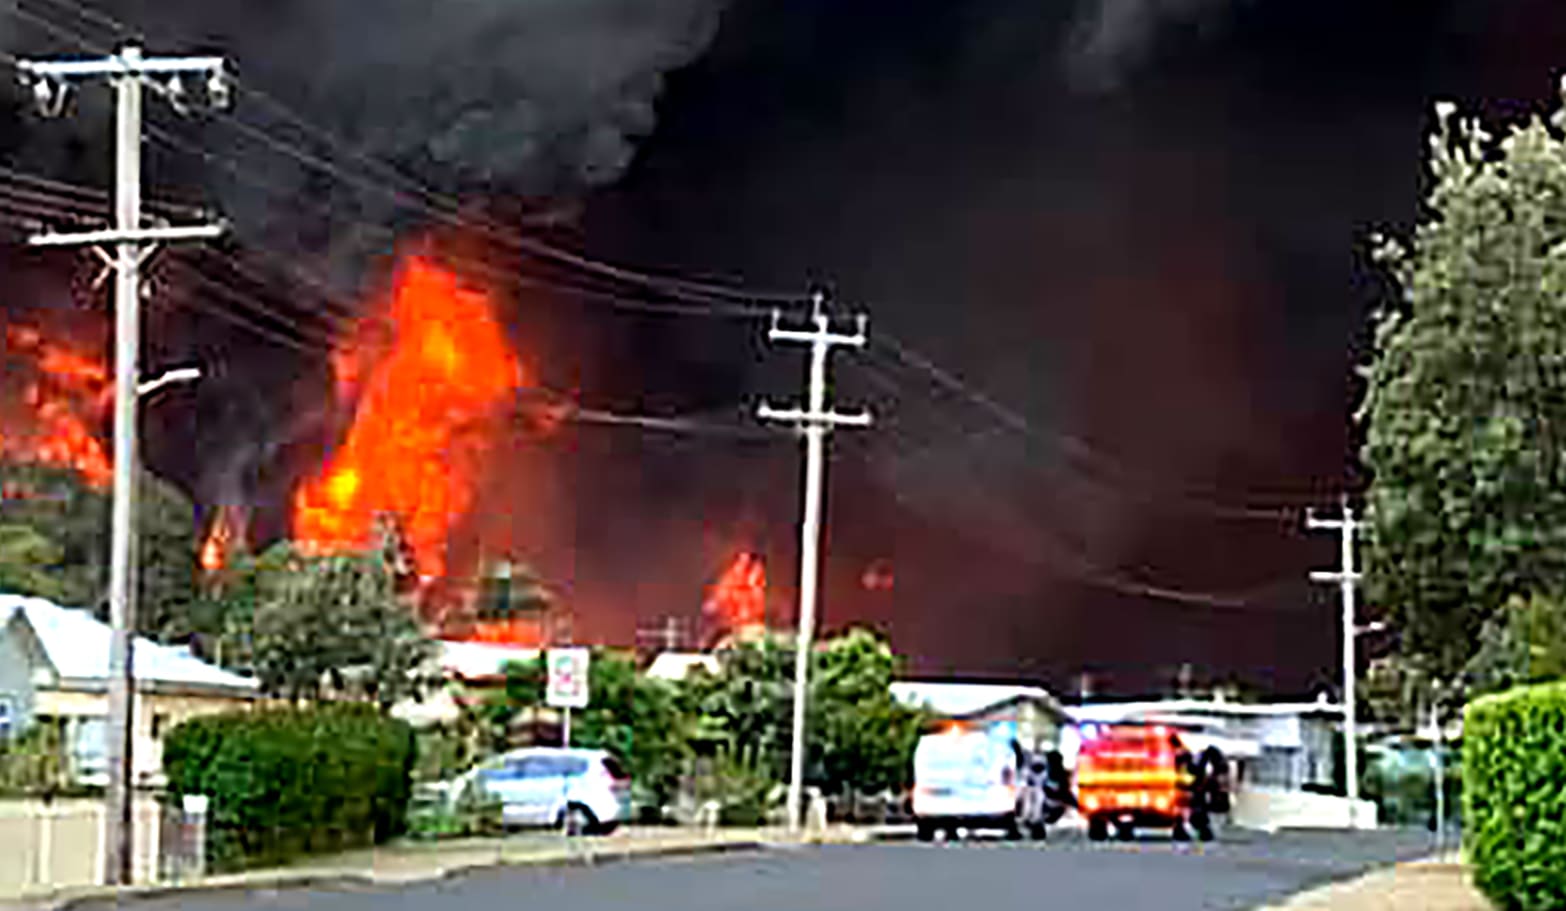 Flames from an out of control bushfire seen from a nearby residential area in Harrington, some 335 kilometers northeast of Sydney.